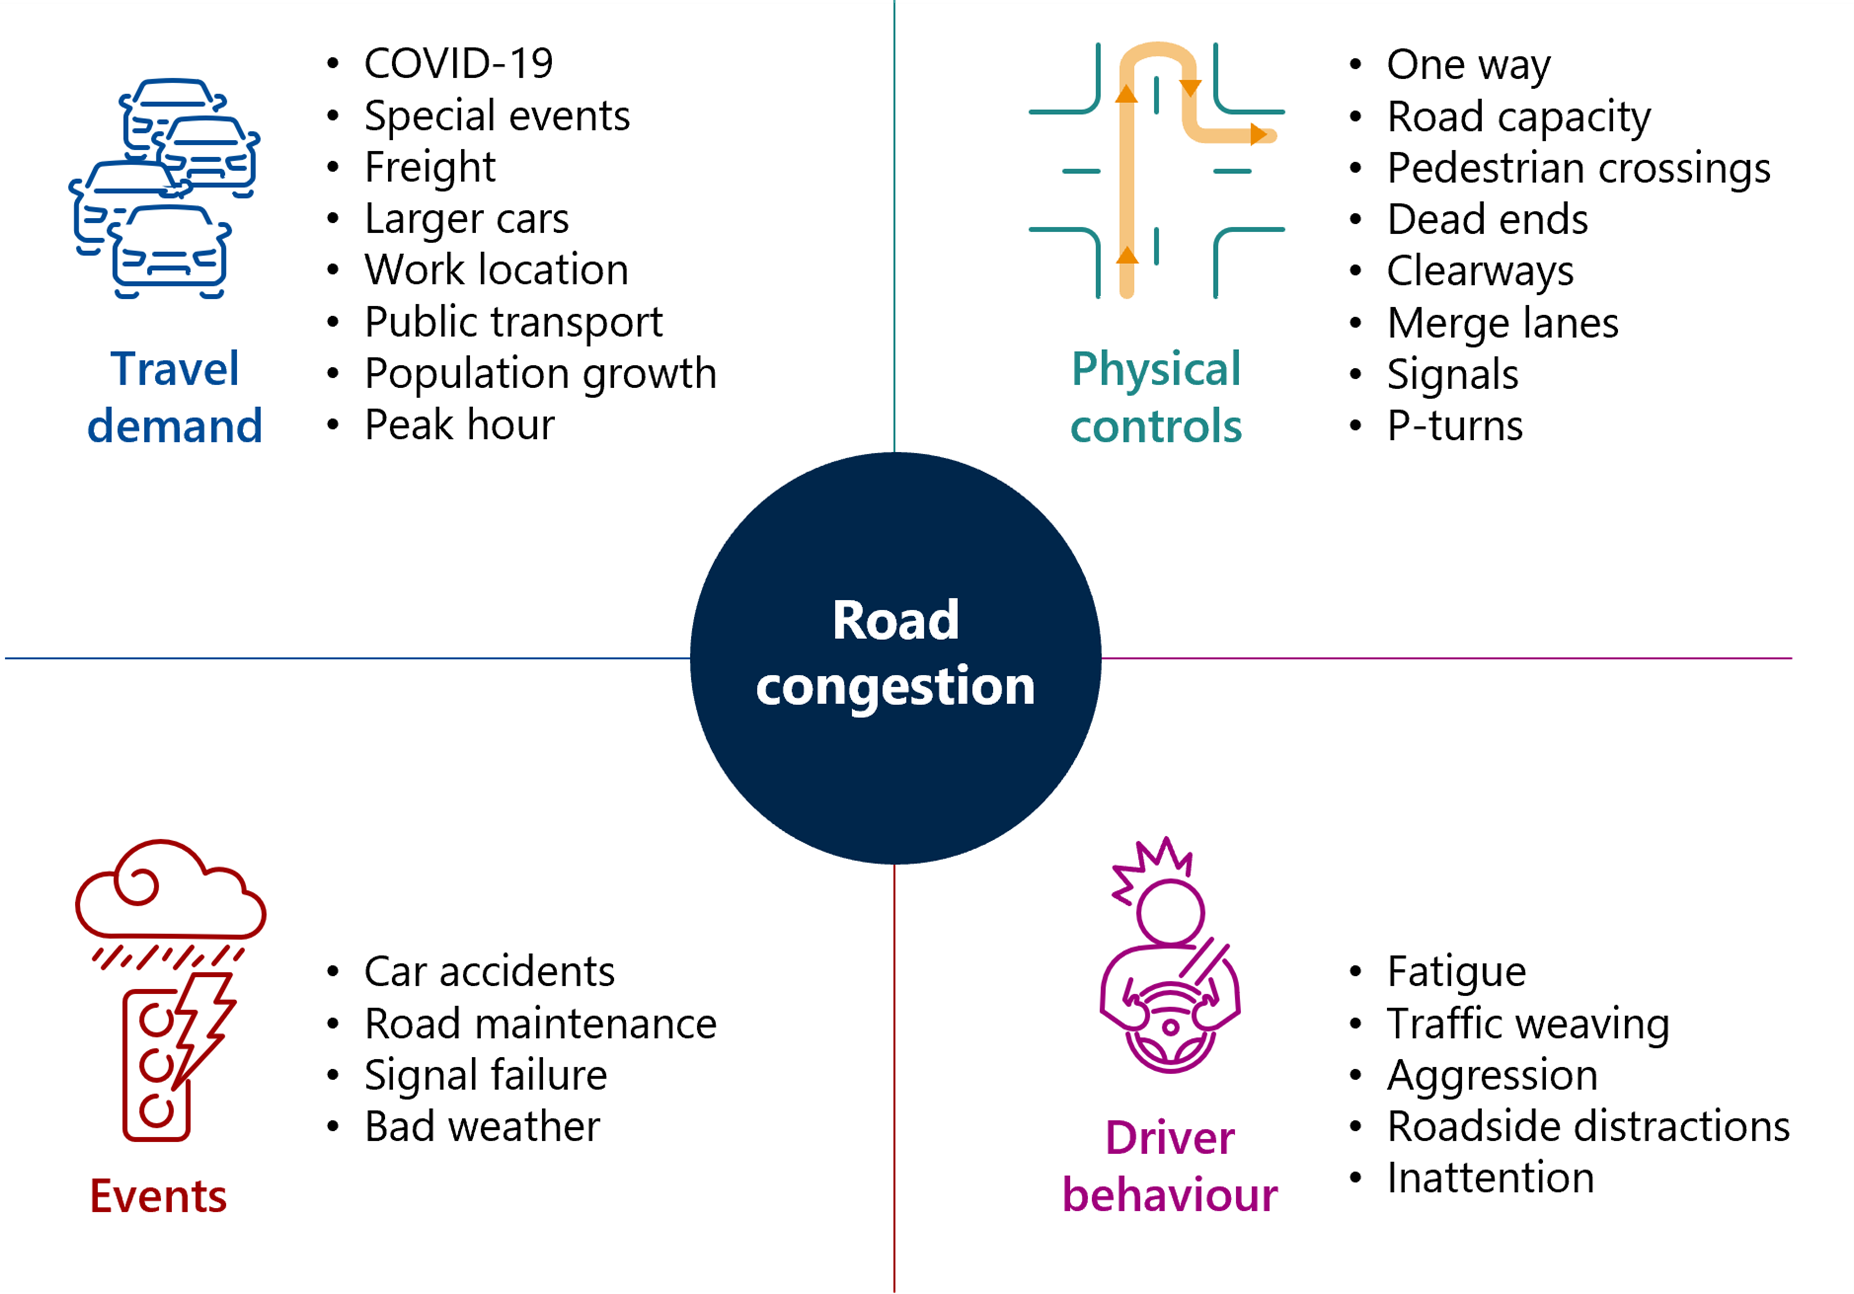 This infographic has the heading ‘Road congestion’ in the centre, surrounded by quadrants. Each quadrant contains a category of factors that can hamper or support traffic flow, and a list of factors in that category. The categories are travel demand, physical controls, events and driver behaviour. The travel demand factors are: COVID-19, special events, freight, larger cars, work location, public transport, population growth and peak hour. The physical controls factors are: one way, road capacity, pedestrian crossings, dead ends, clearways, merge lanes, signals and P-turns. The events factors are: car accidents, road maintenance, signal failure and bad weather. The driver behaviour factors are: fatigue, traffic weaving, aggression, roadside distractions and inattention.